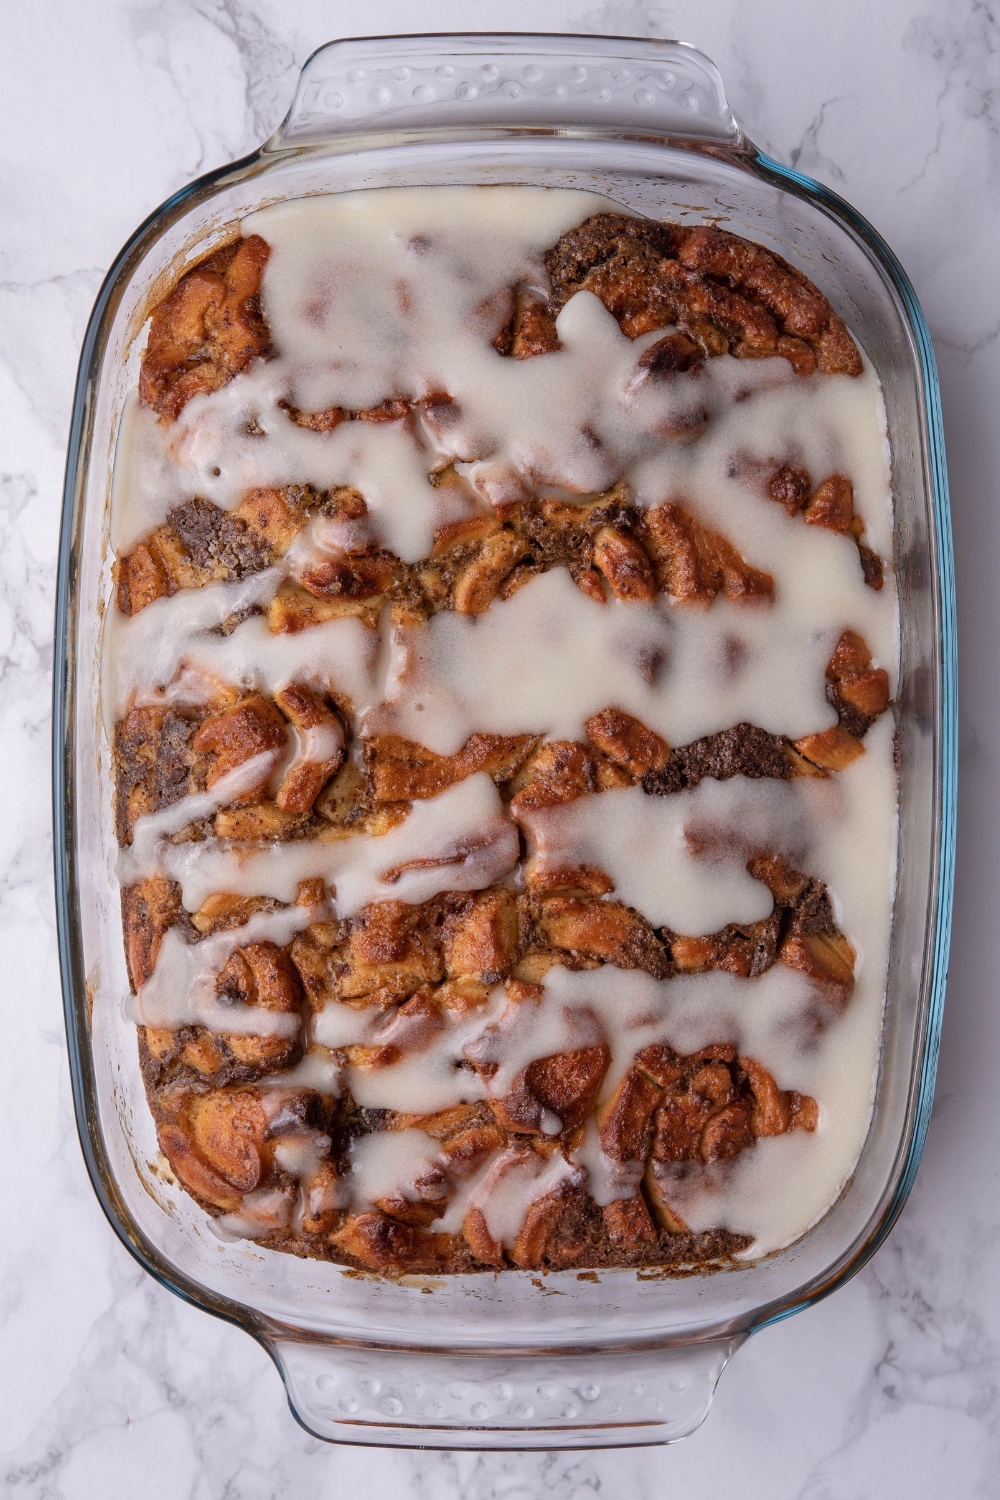 Icing on top of cinnamon roll casserole in a baking dish.